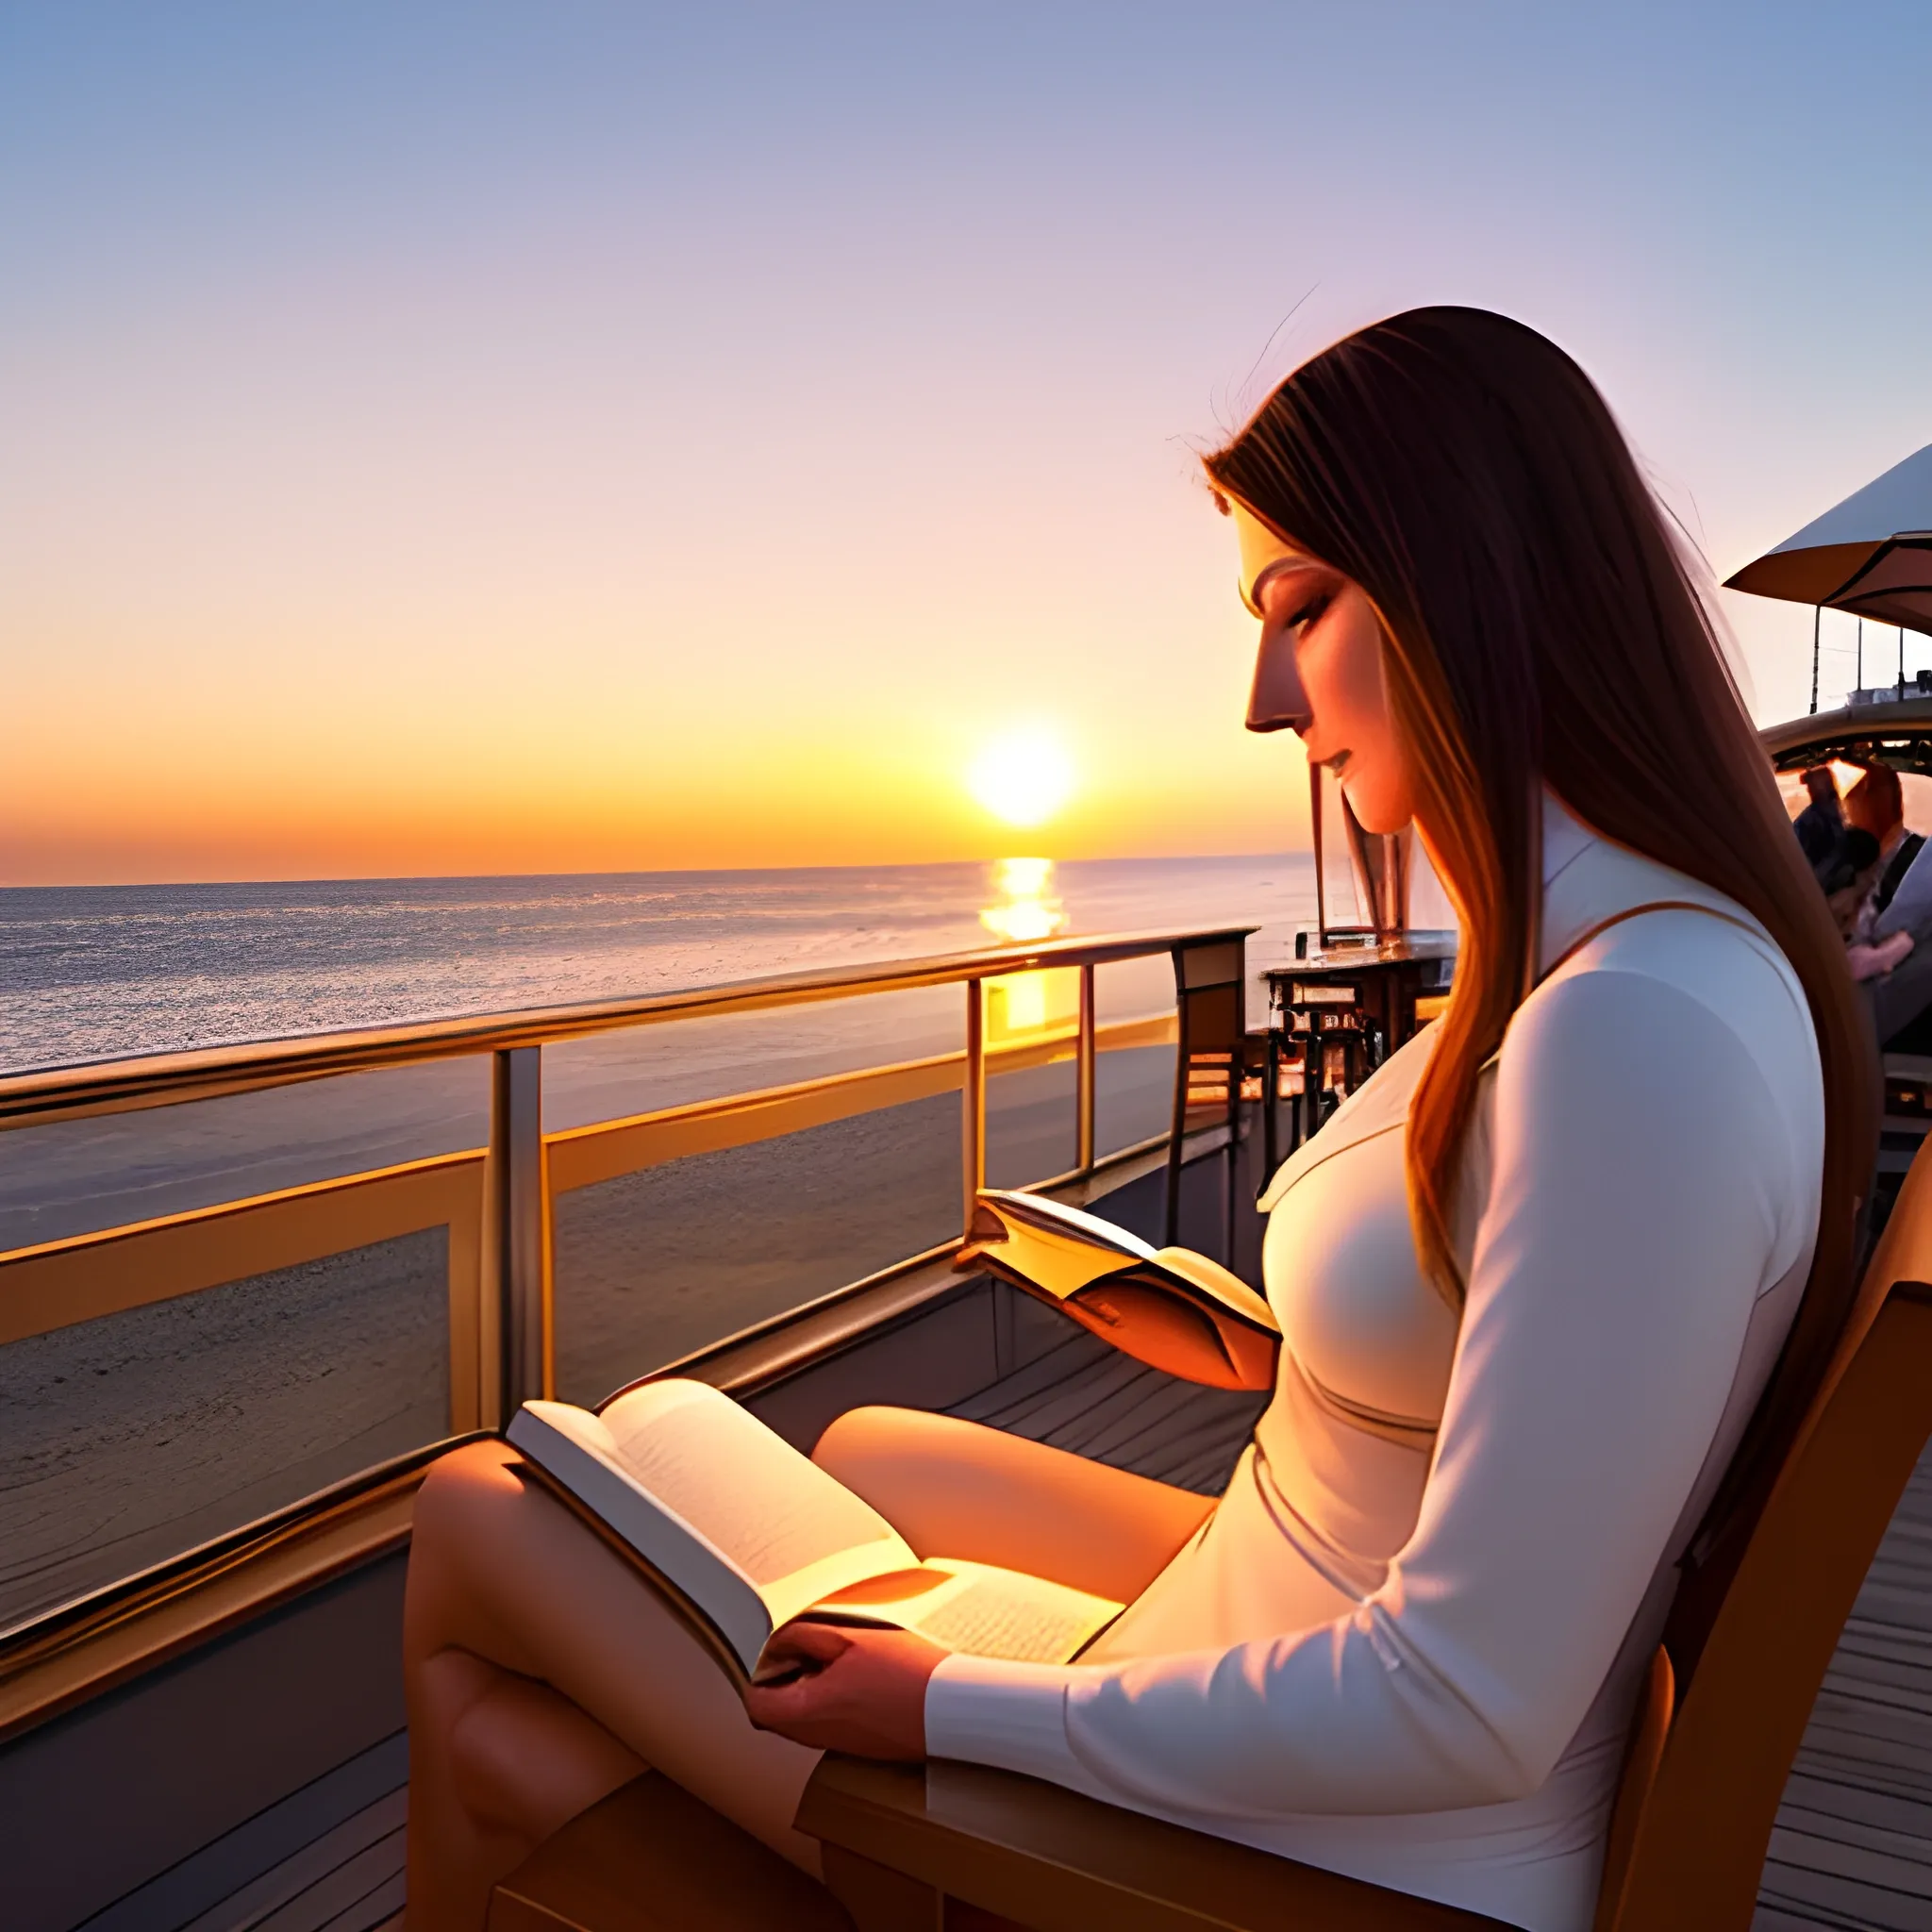 A young and beautiful woman reading a book in the ambiance of a sunset-lit seaside café
